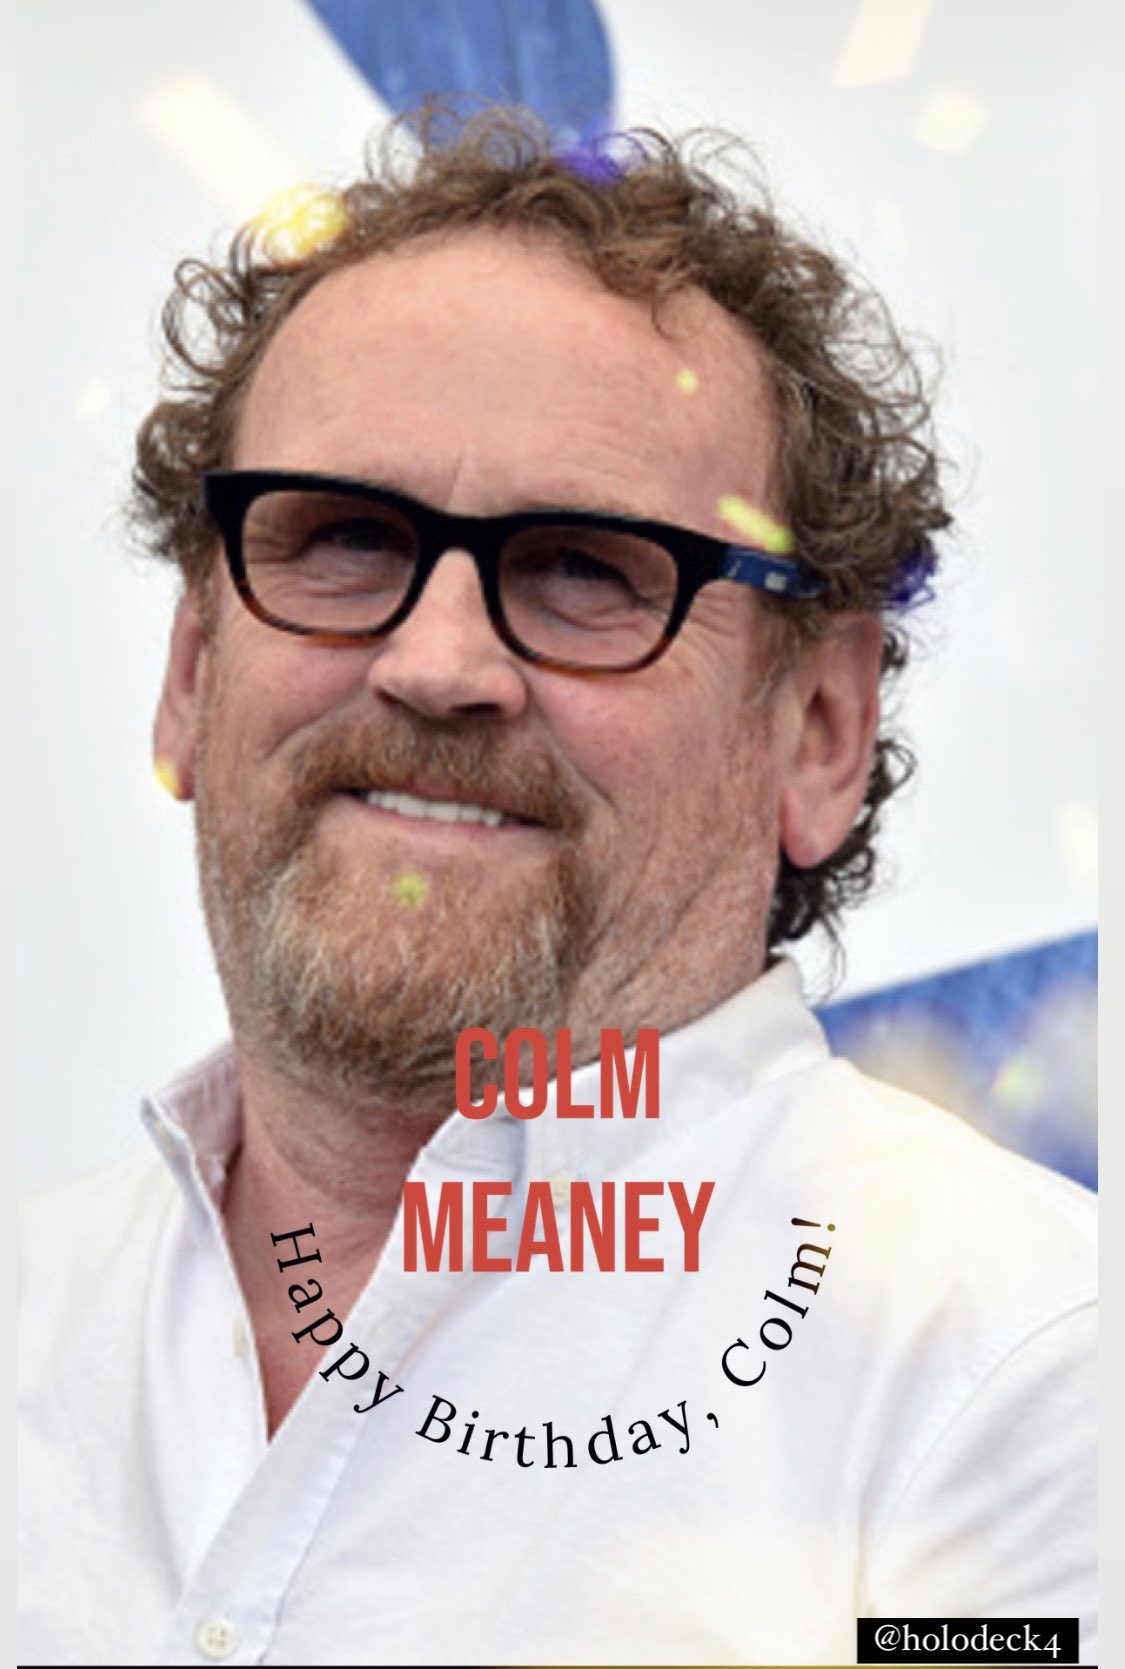 Happy Birthday, Colm Meaney! 